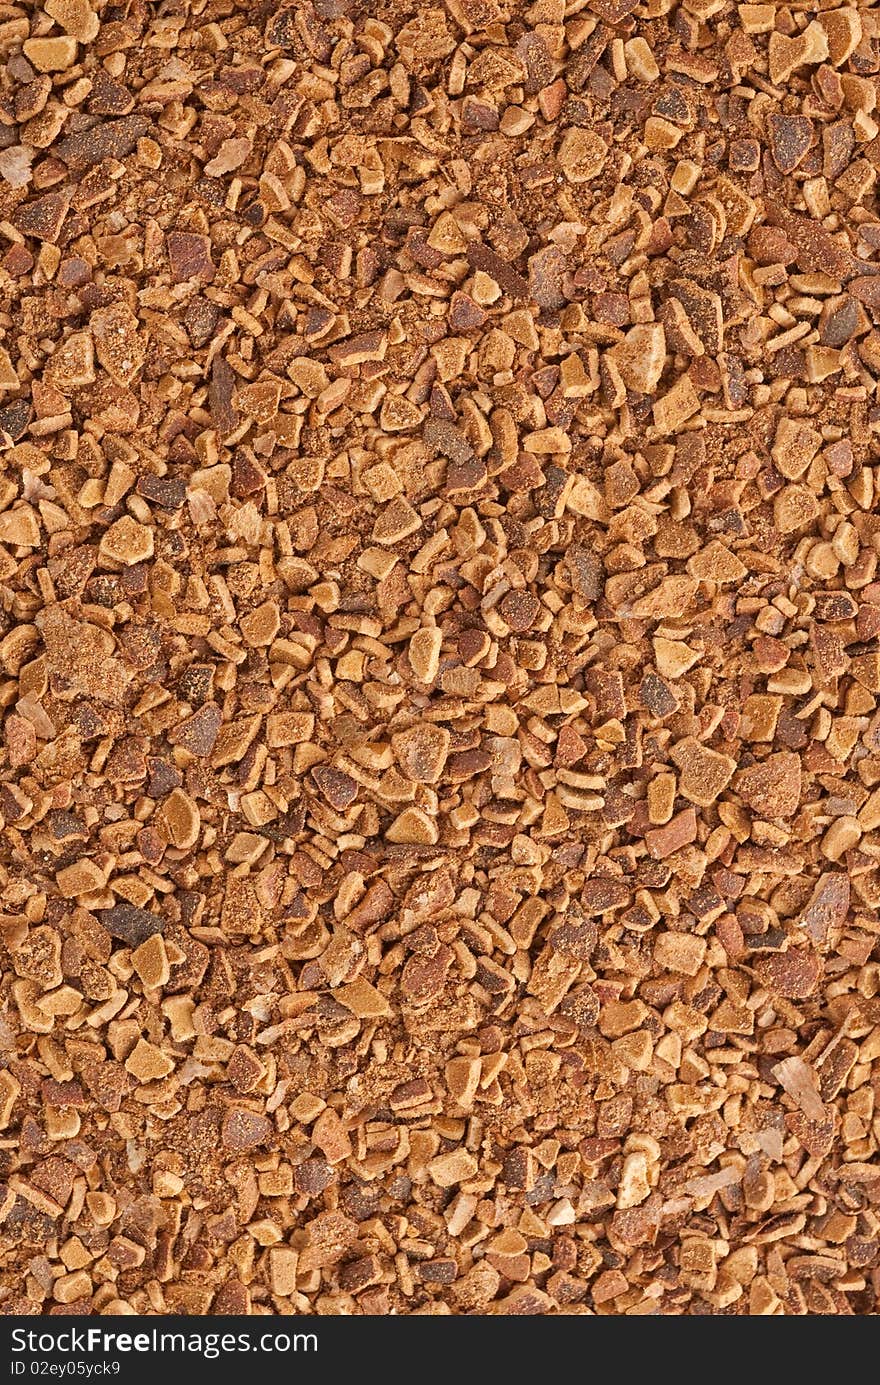 Background of finely milled shell of pine nuts